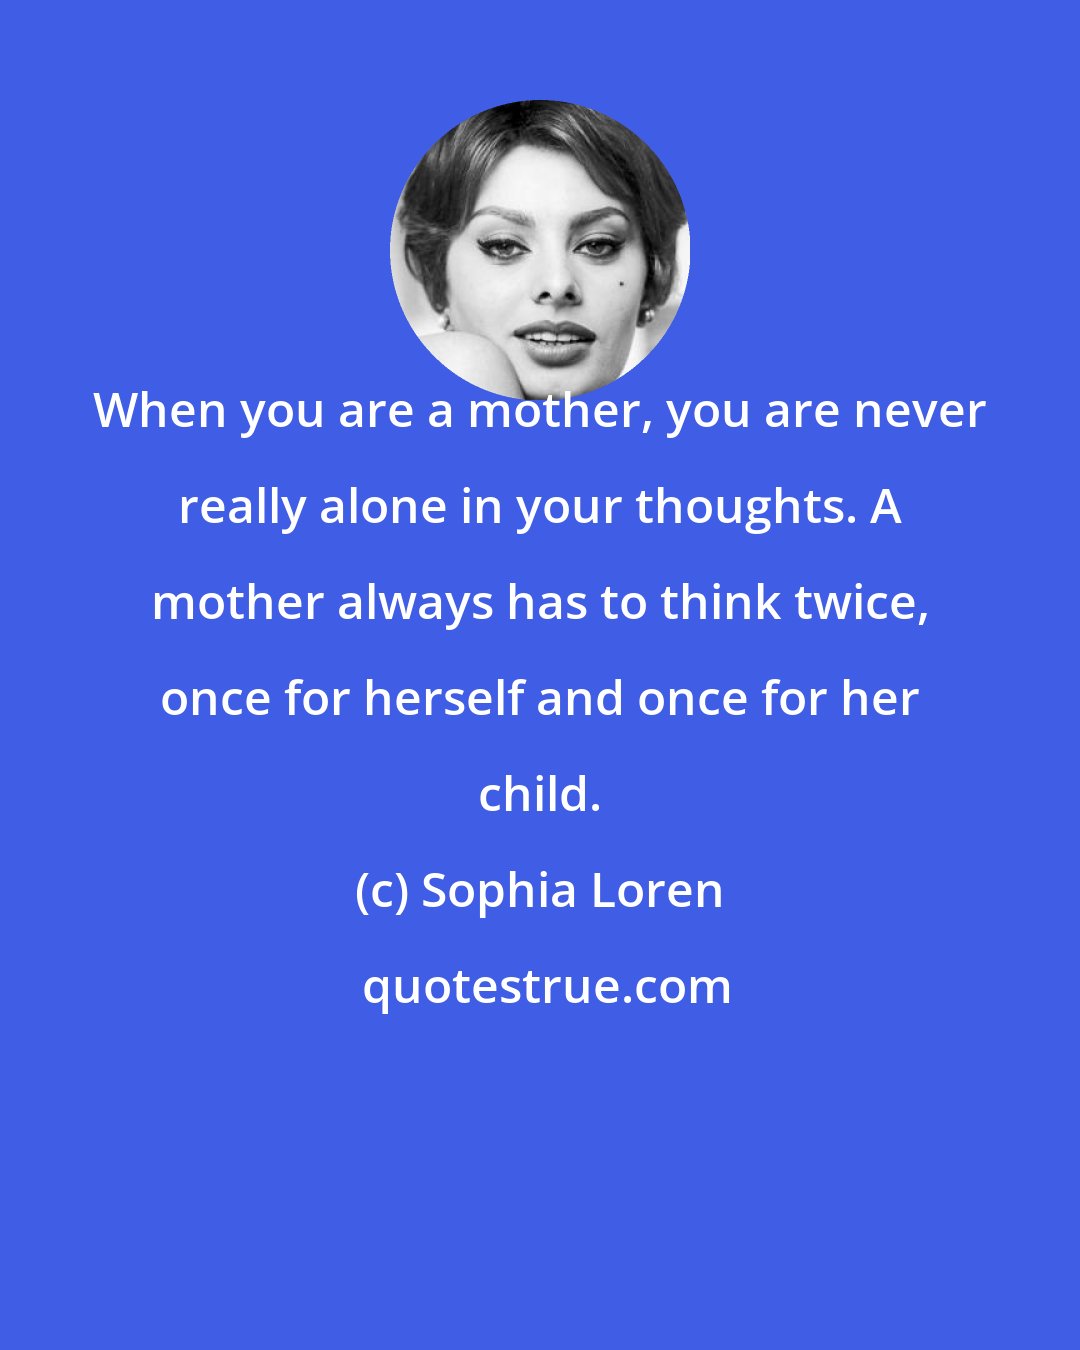 Sophia Loren: When you are a mother, you are never really alone in your thoughts. A mother always has to think twice, once for herself and once for her child.